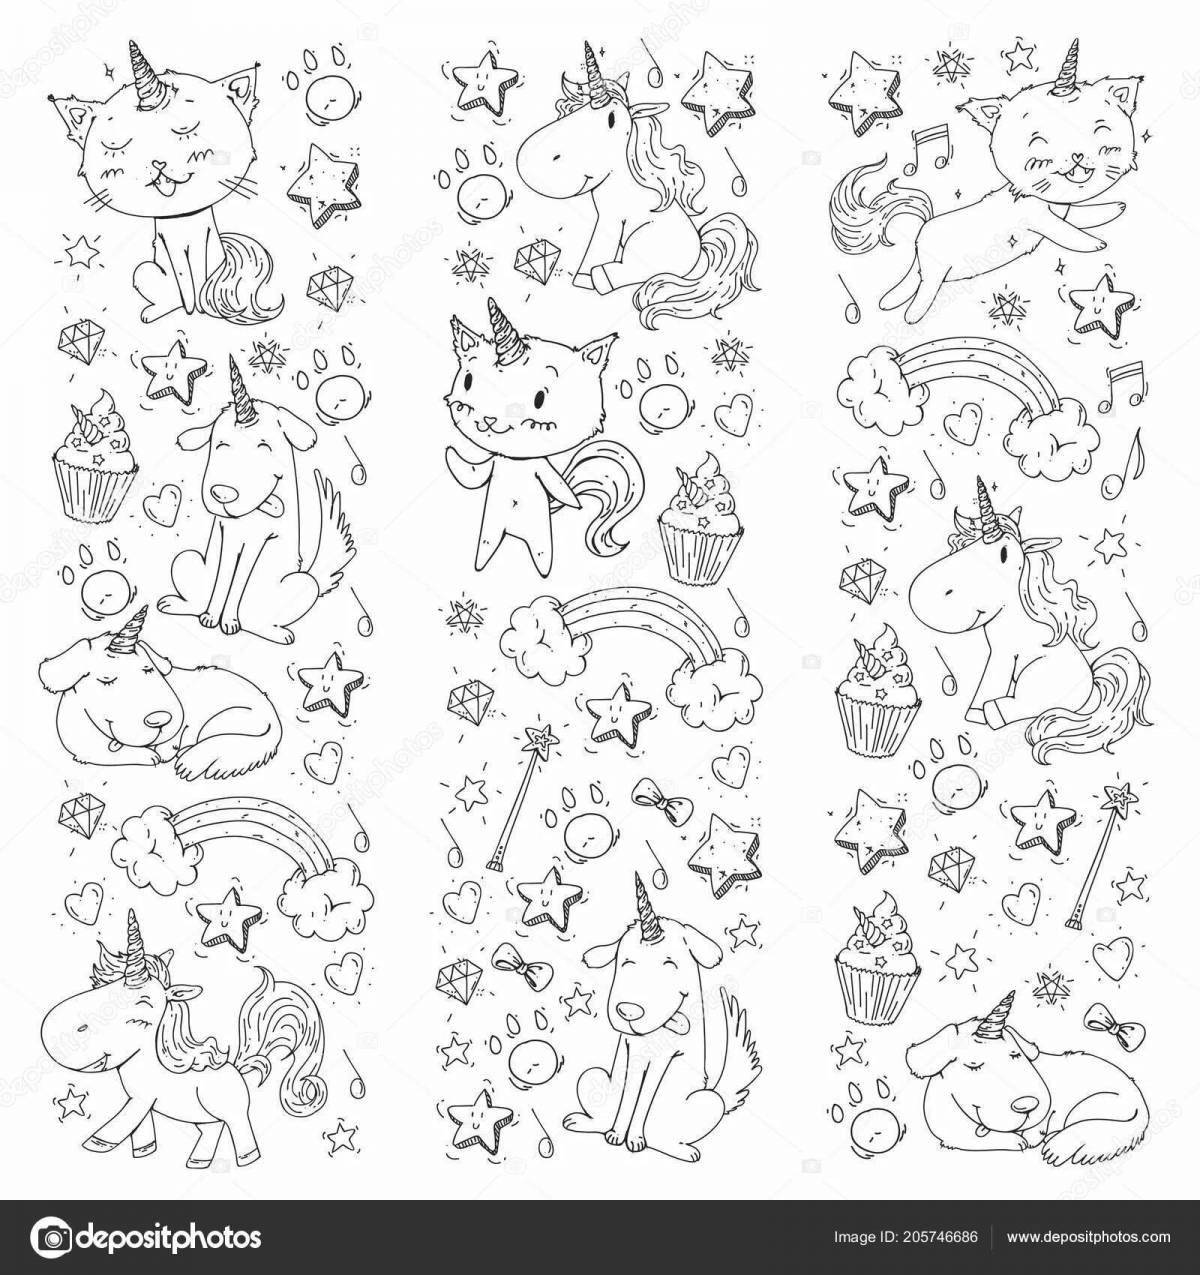 Adorable cat coloring book sticker